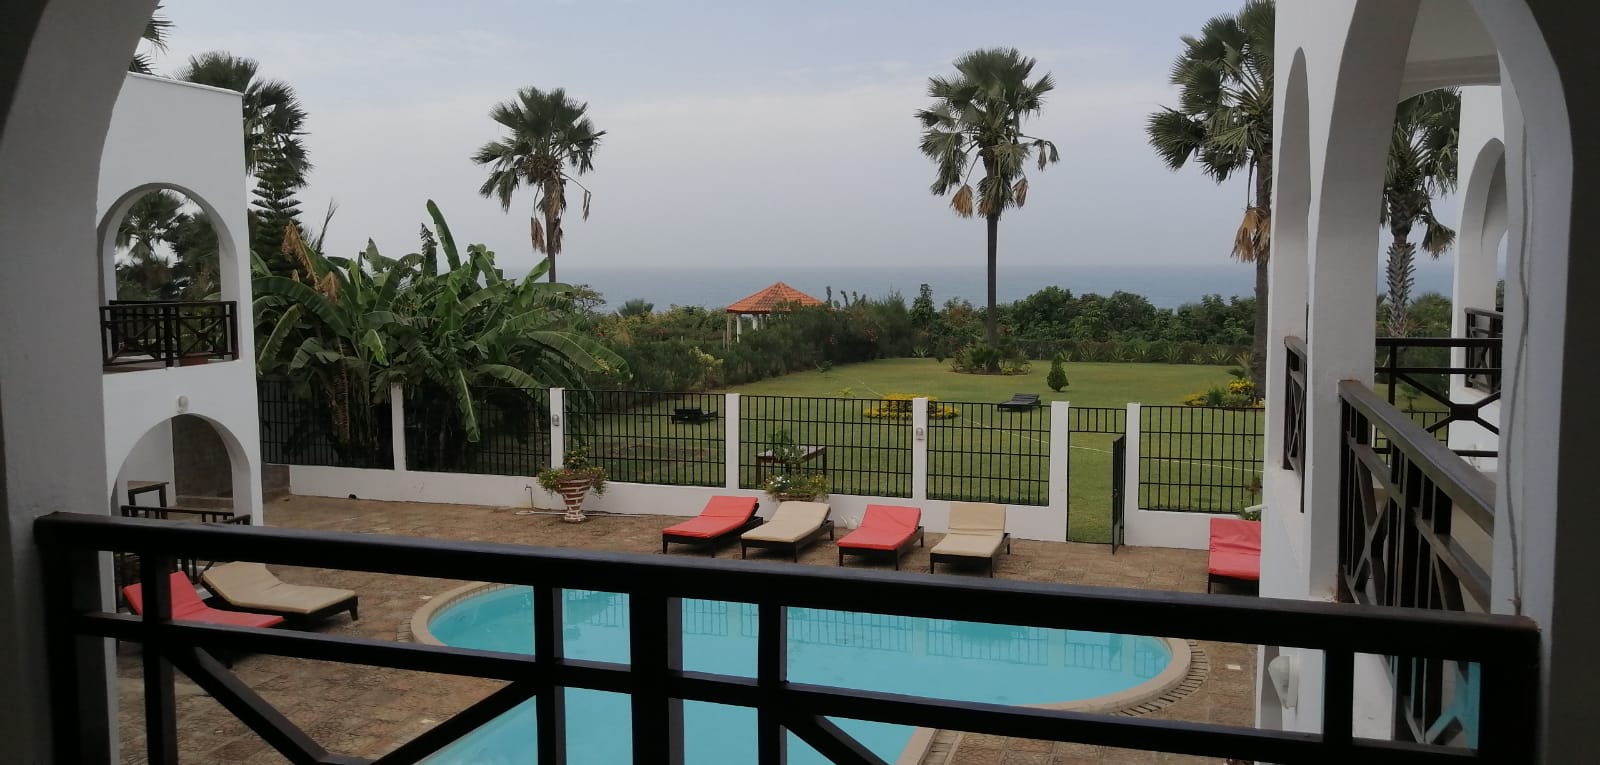 Harmony1etagepoolmeer - CHRISTMAS &amp; NEW YEAR's DAY IN GAMBIA! HARMONY RESORT OFFERS A GREAT GARDEN &amp; POOL AND AN ABSOLUTE PRIME LOCATION WITH SEA VIEW